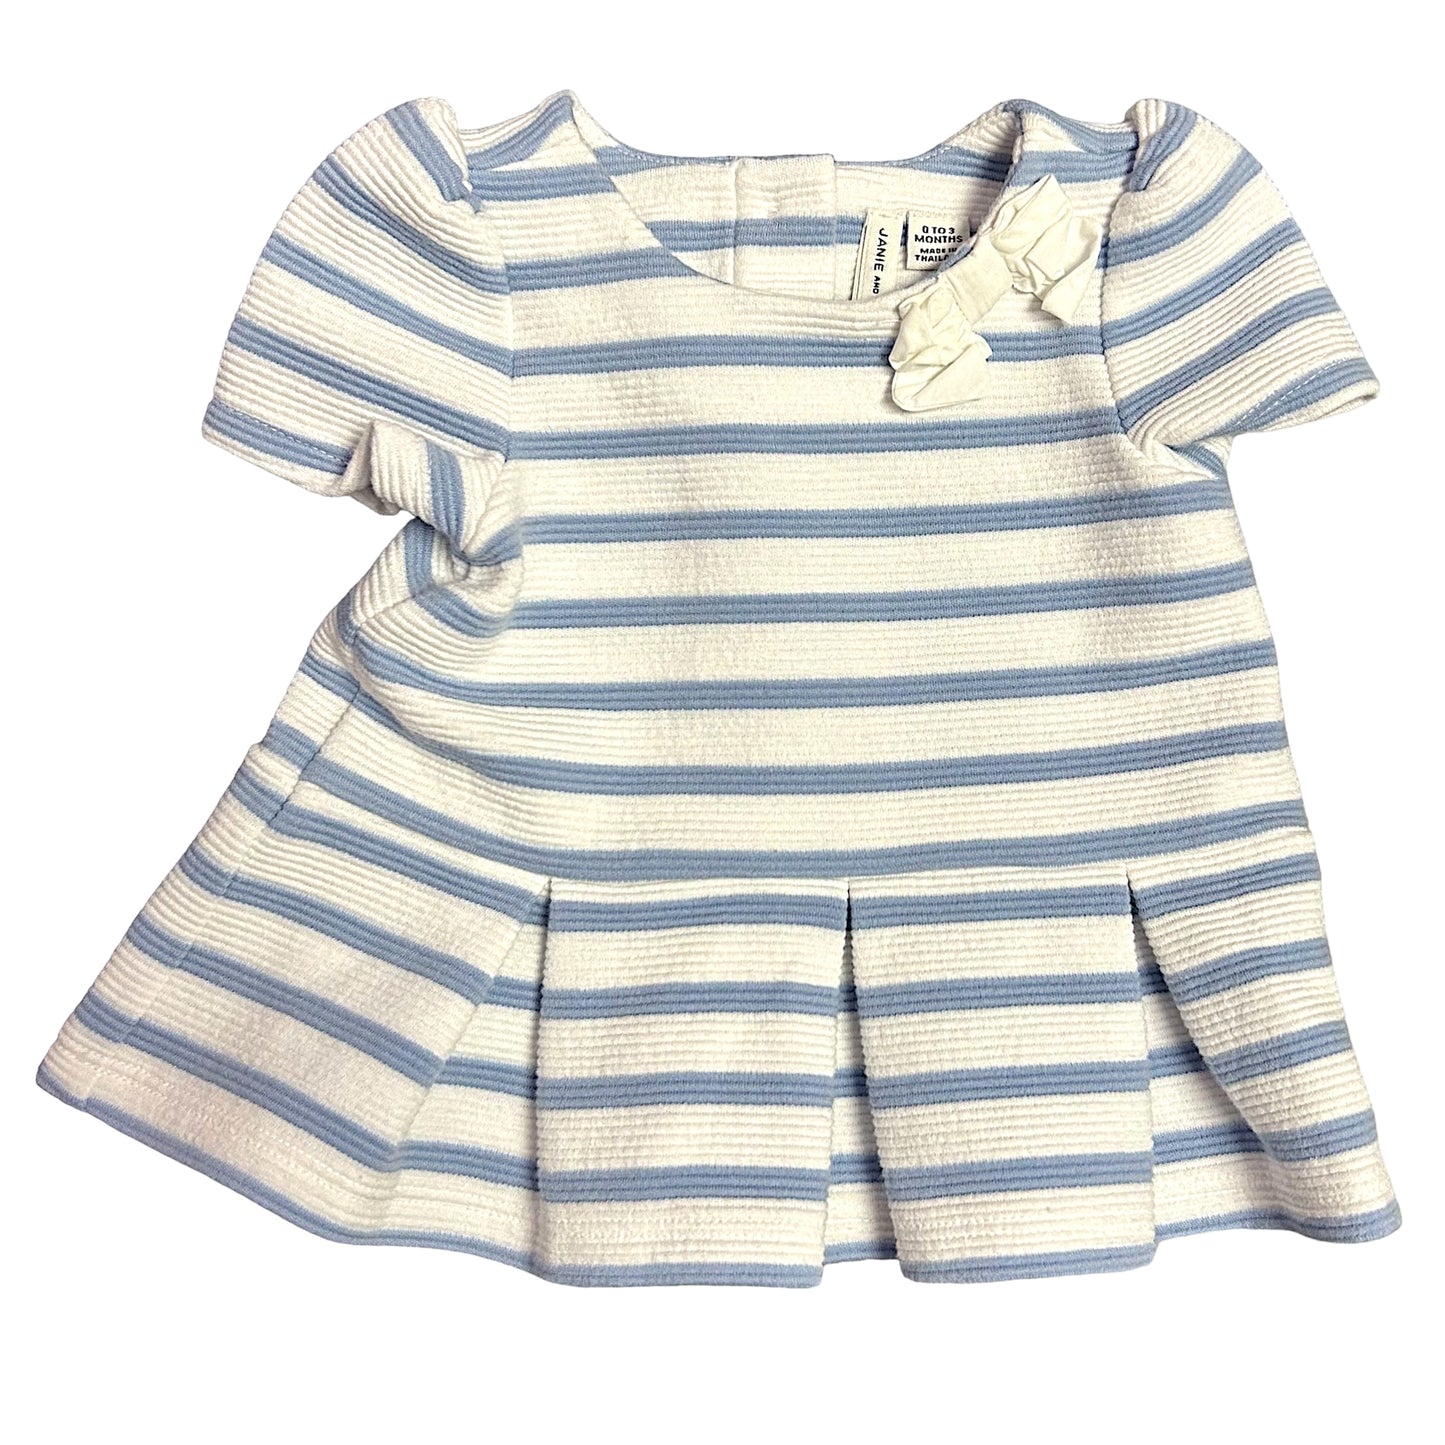 Girls Janie and Jack Size 0-3 Months Blue & Ivory Pleated Dress with Bow Accent